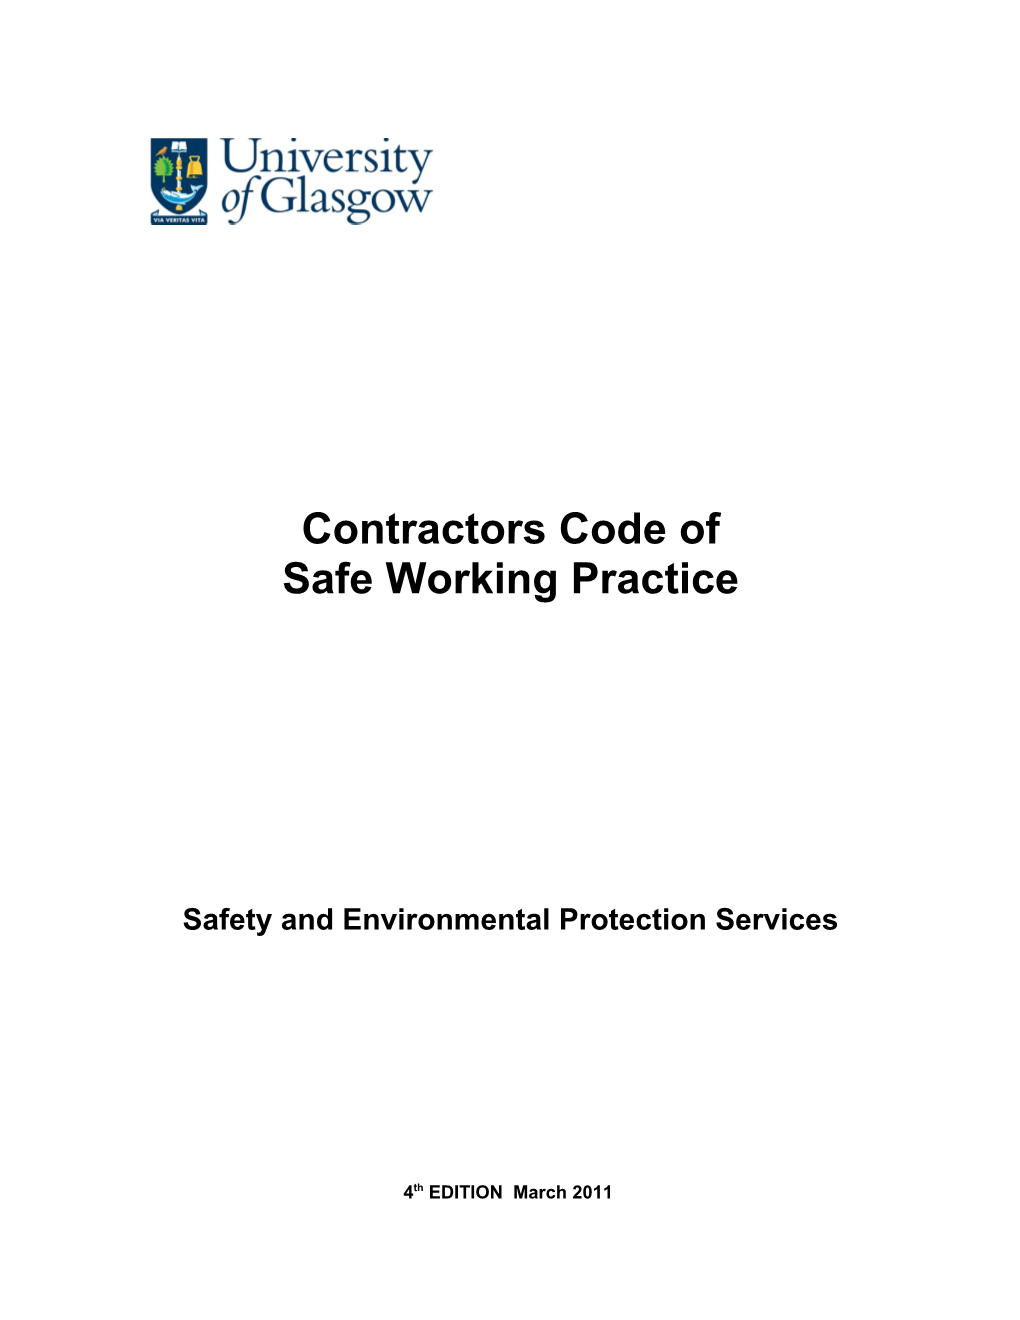 Safety and Environmental Protection Services